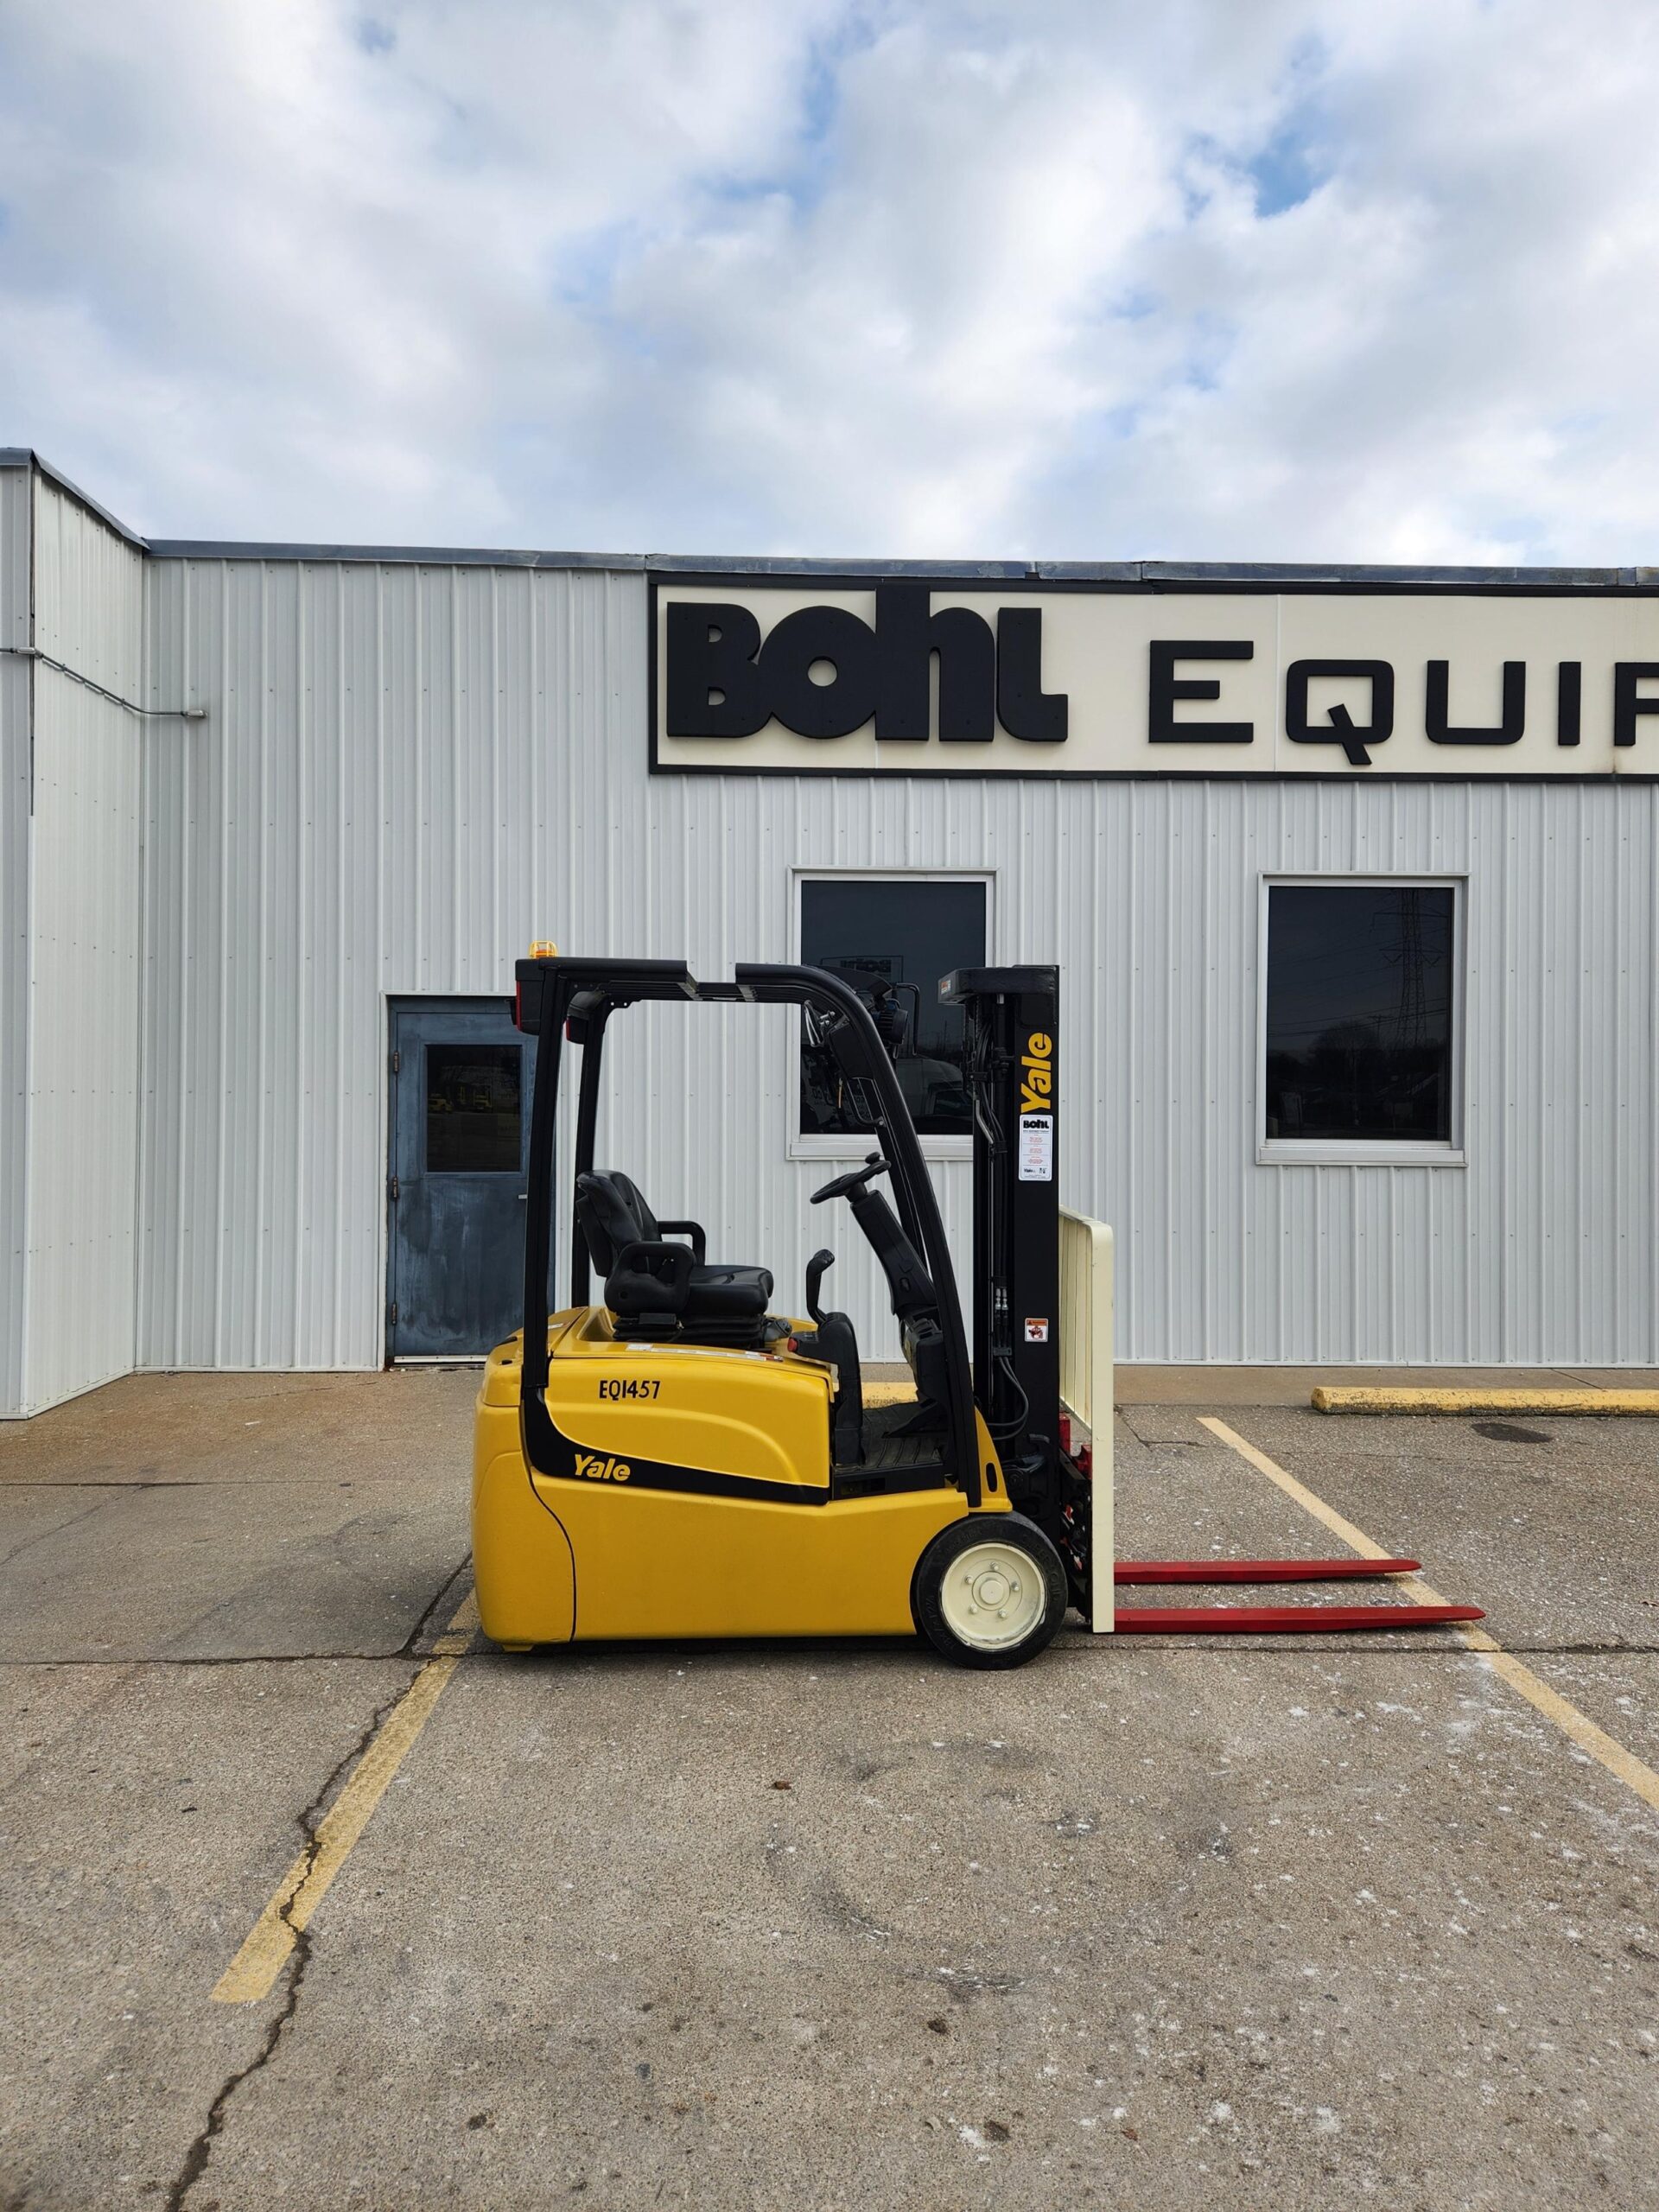 2015 Yale ERP040VT, 4,000 lb. Electric Rider Lift Truck Side View